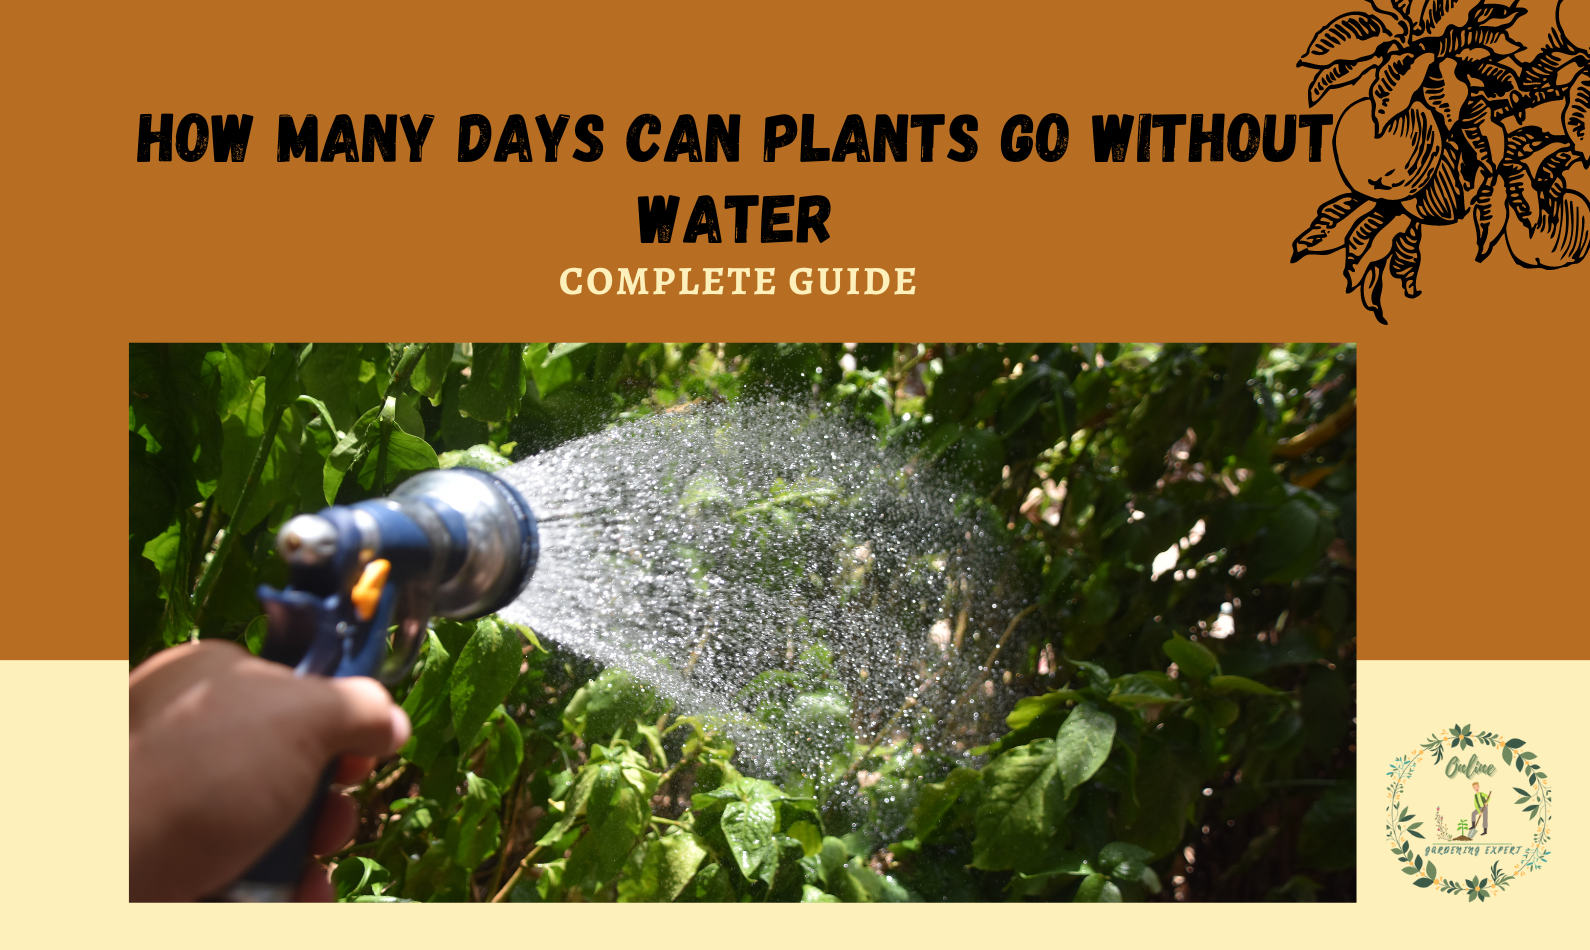 How Many Days Can Plants Go Without Water?